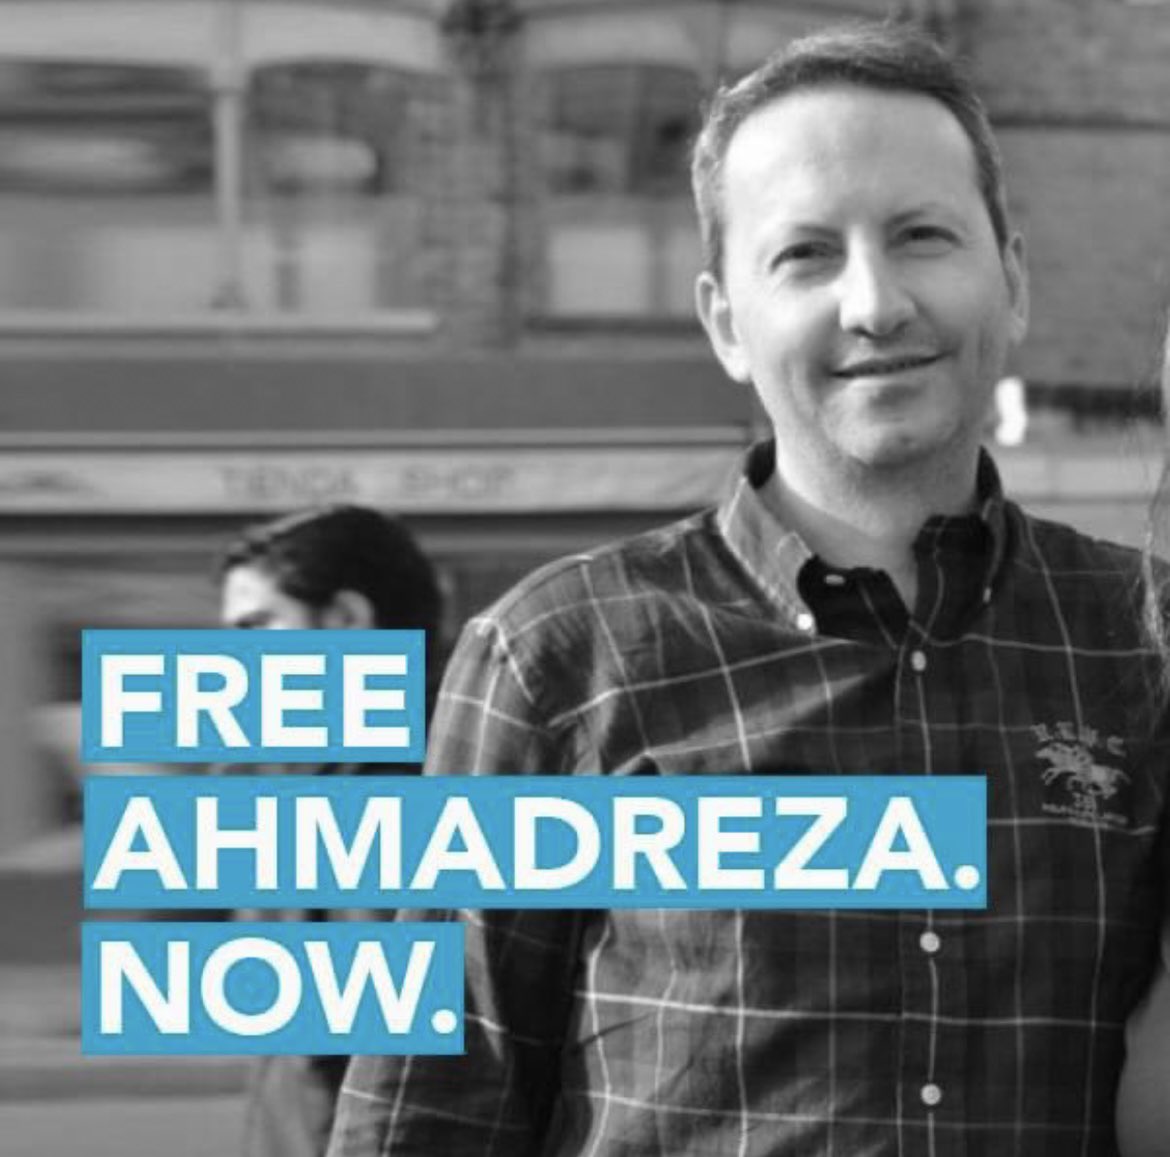 8 years of unspeakable cruelty, blatant human rights breach, injustice

We urge @TobiasBillstrom & @SwedishPM to act with the utmost urgency to protect #AhmadrezaDjalali's human rights, including his right to life, & to #BringDjalaliHome
✍️amnesty.be/veux-agir/agir…

#SaveAhmadreza